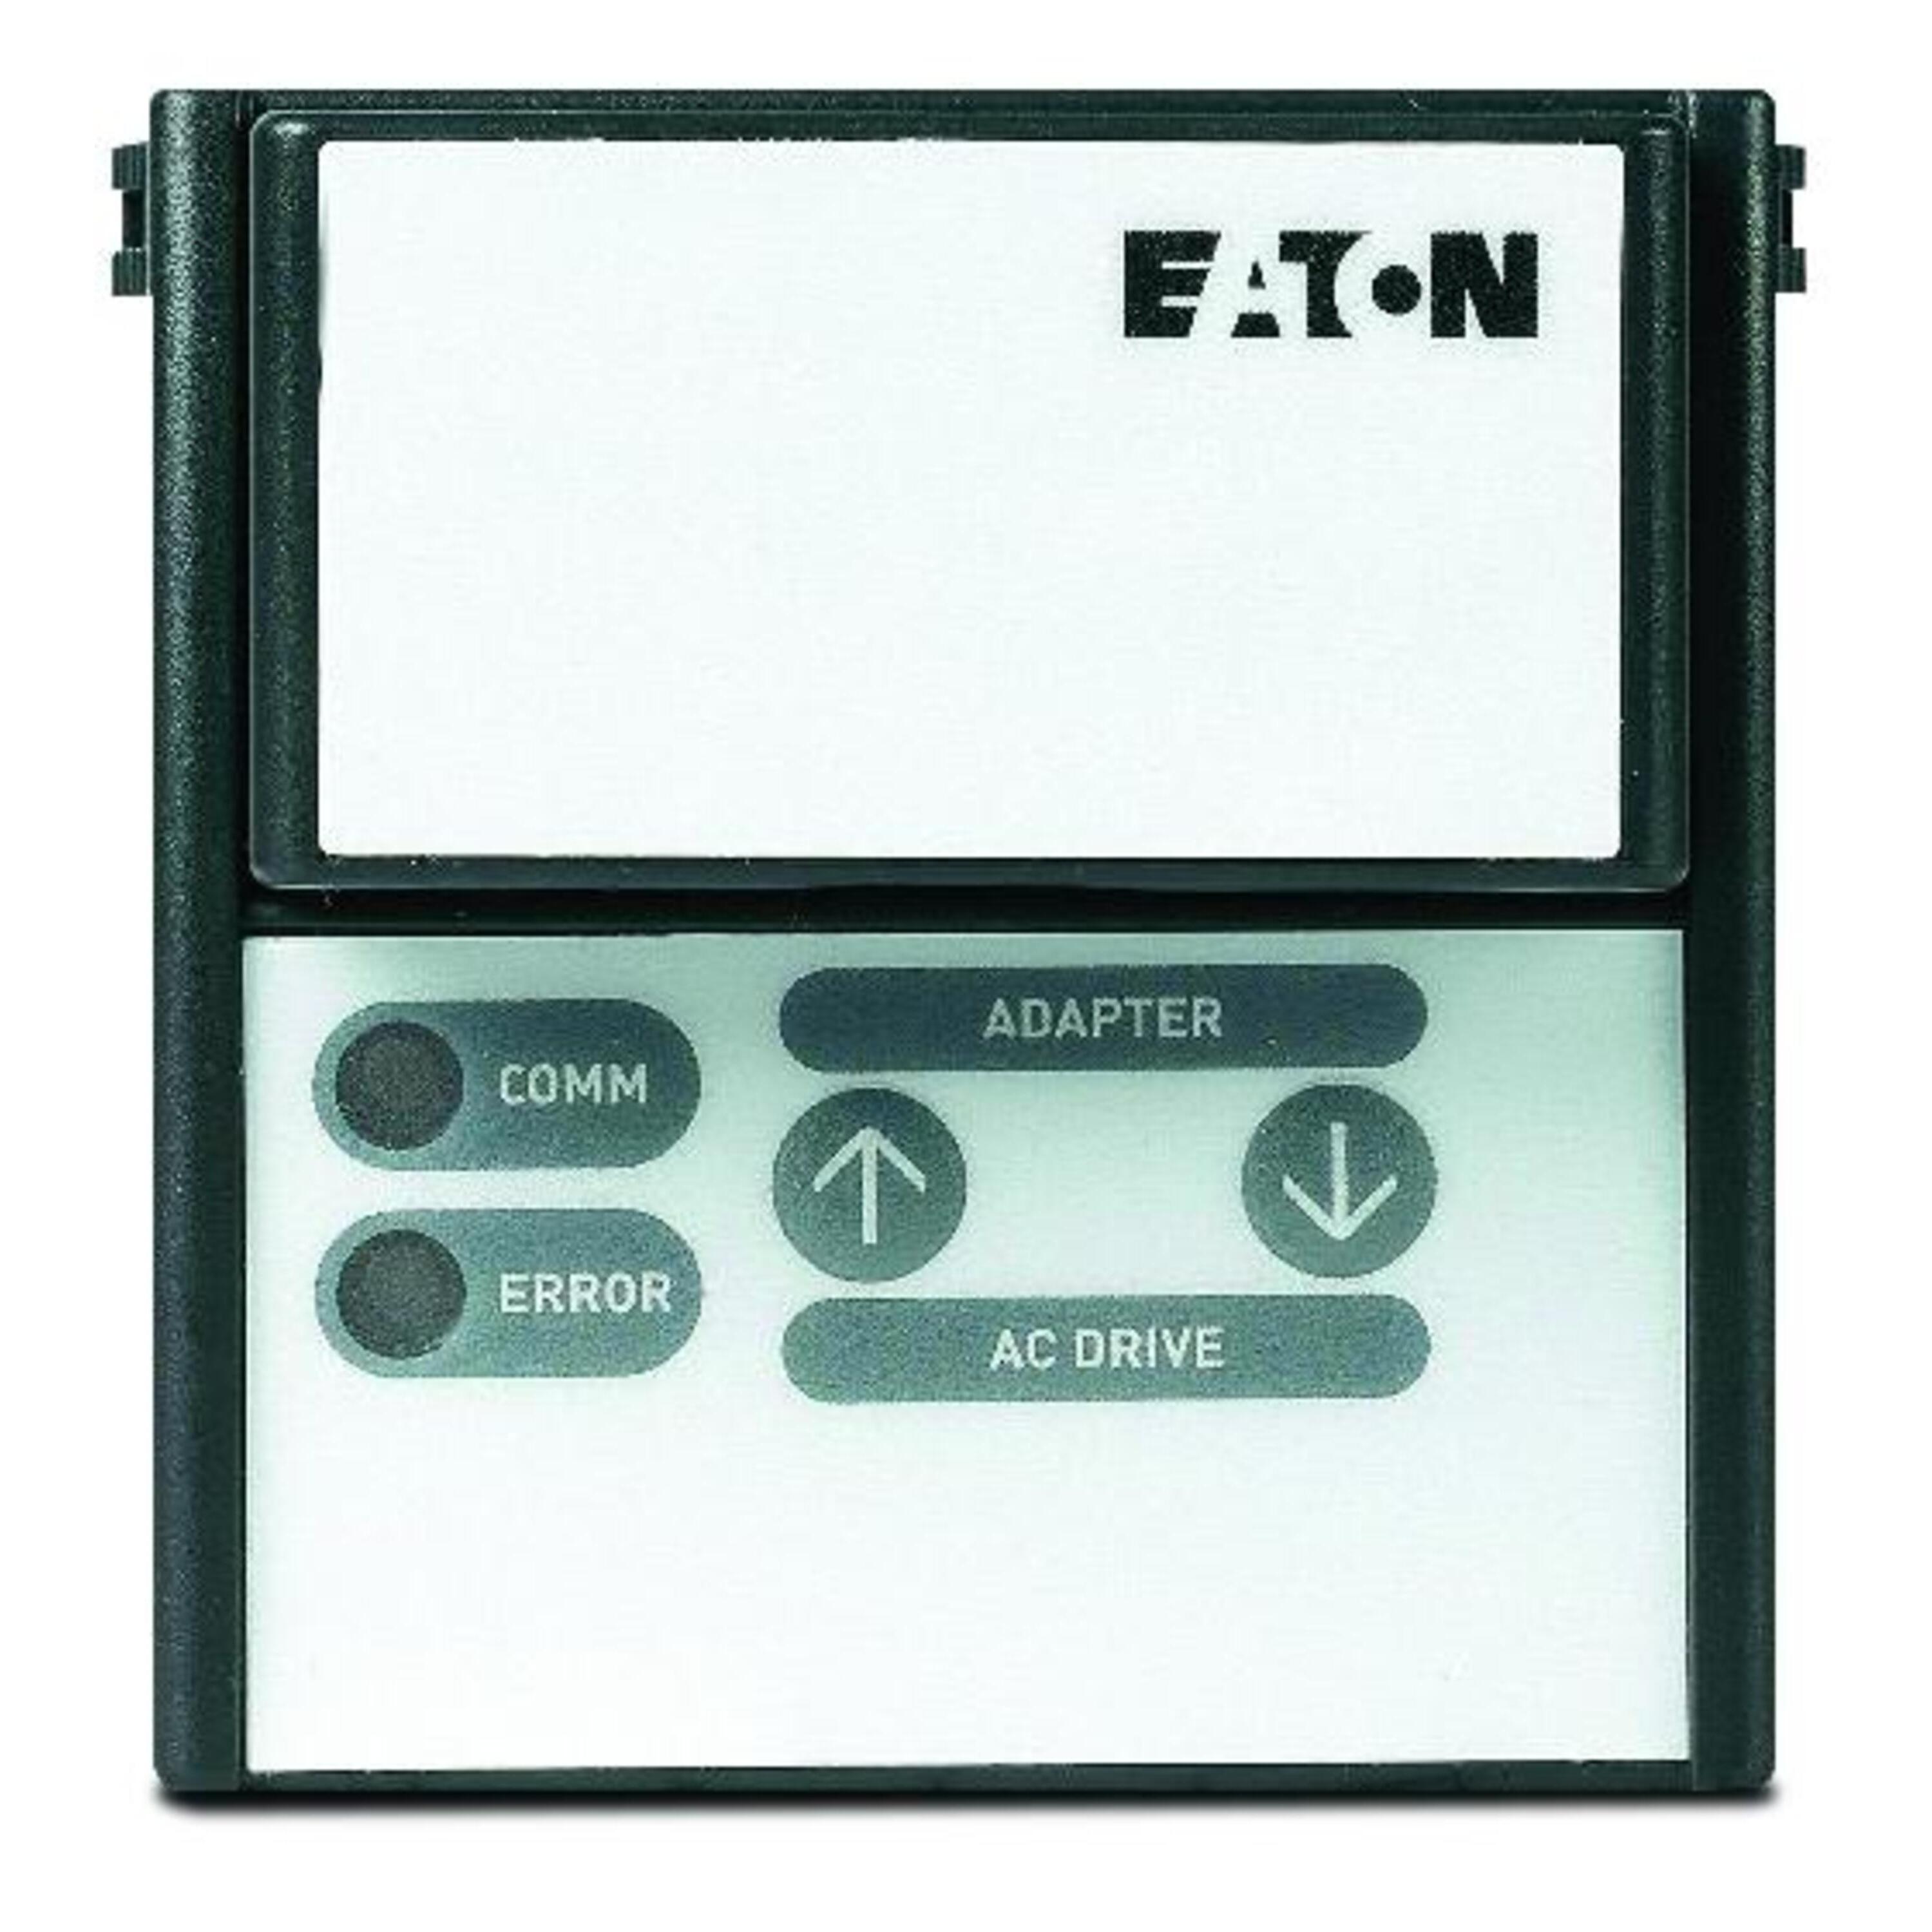 Eaton MMX-COM-PC Eaton | Cutler Hammer MMX-COM-PC  Variable Frequency Drives VFD – Configuration Software & Cables https://gesrepair.com/wp-content/uploads/2022/Eaton/Images/Eaton_MMX-COM-PC_Variable_Frequency_Drive.jpg